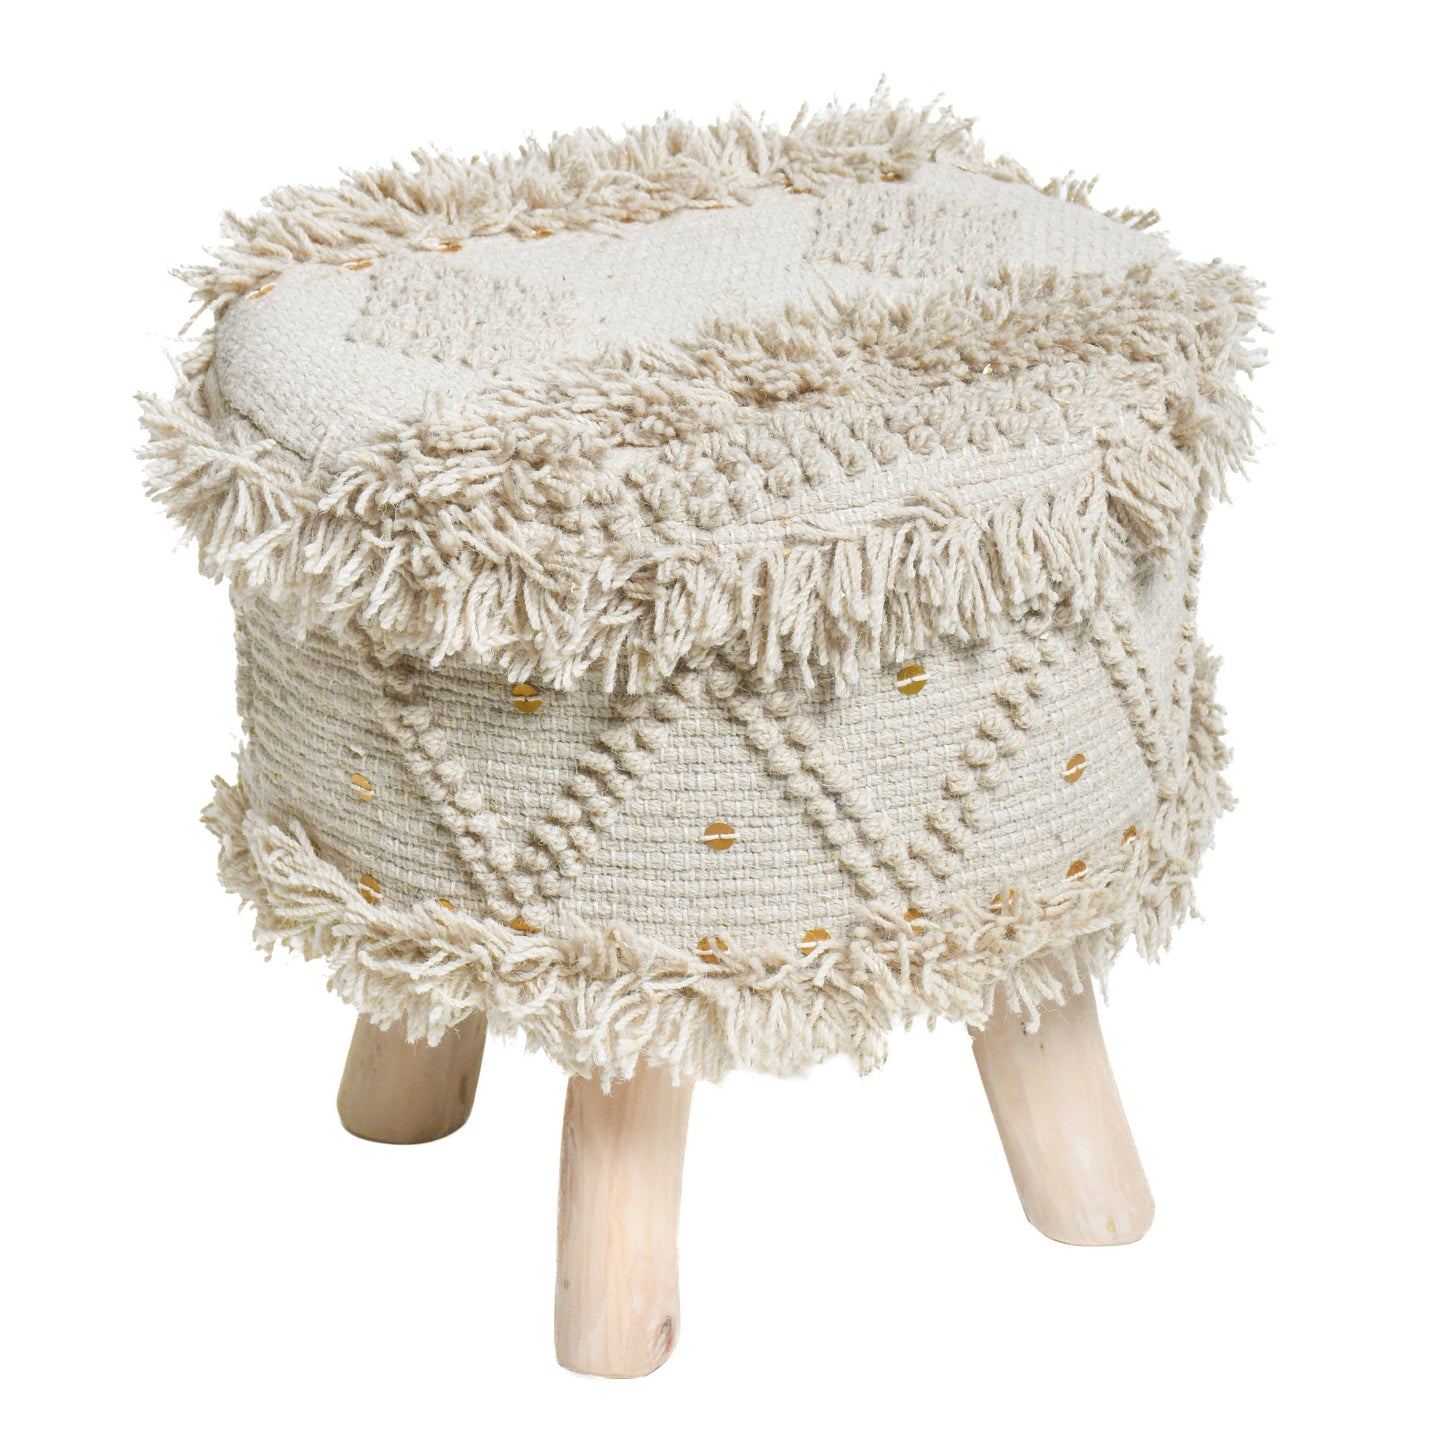 Edene Handcrafted Boho Fabric Stool with Metal Accents